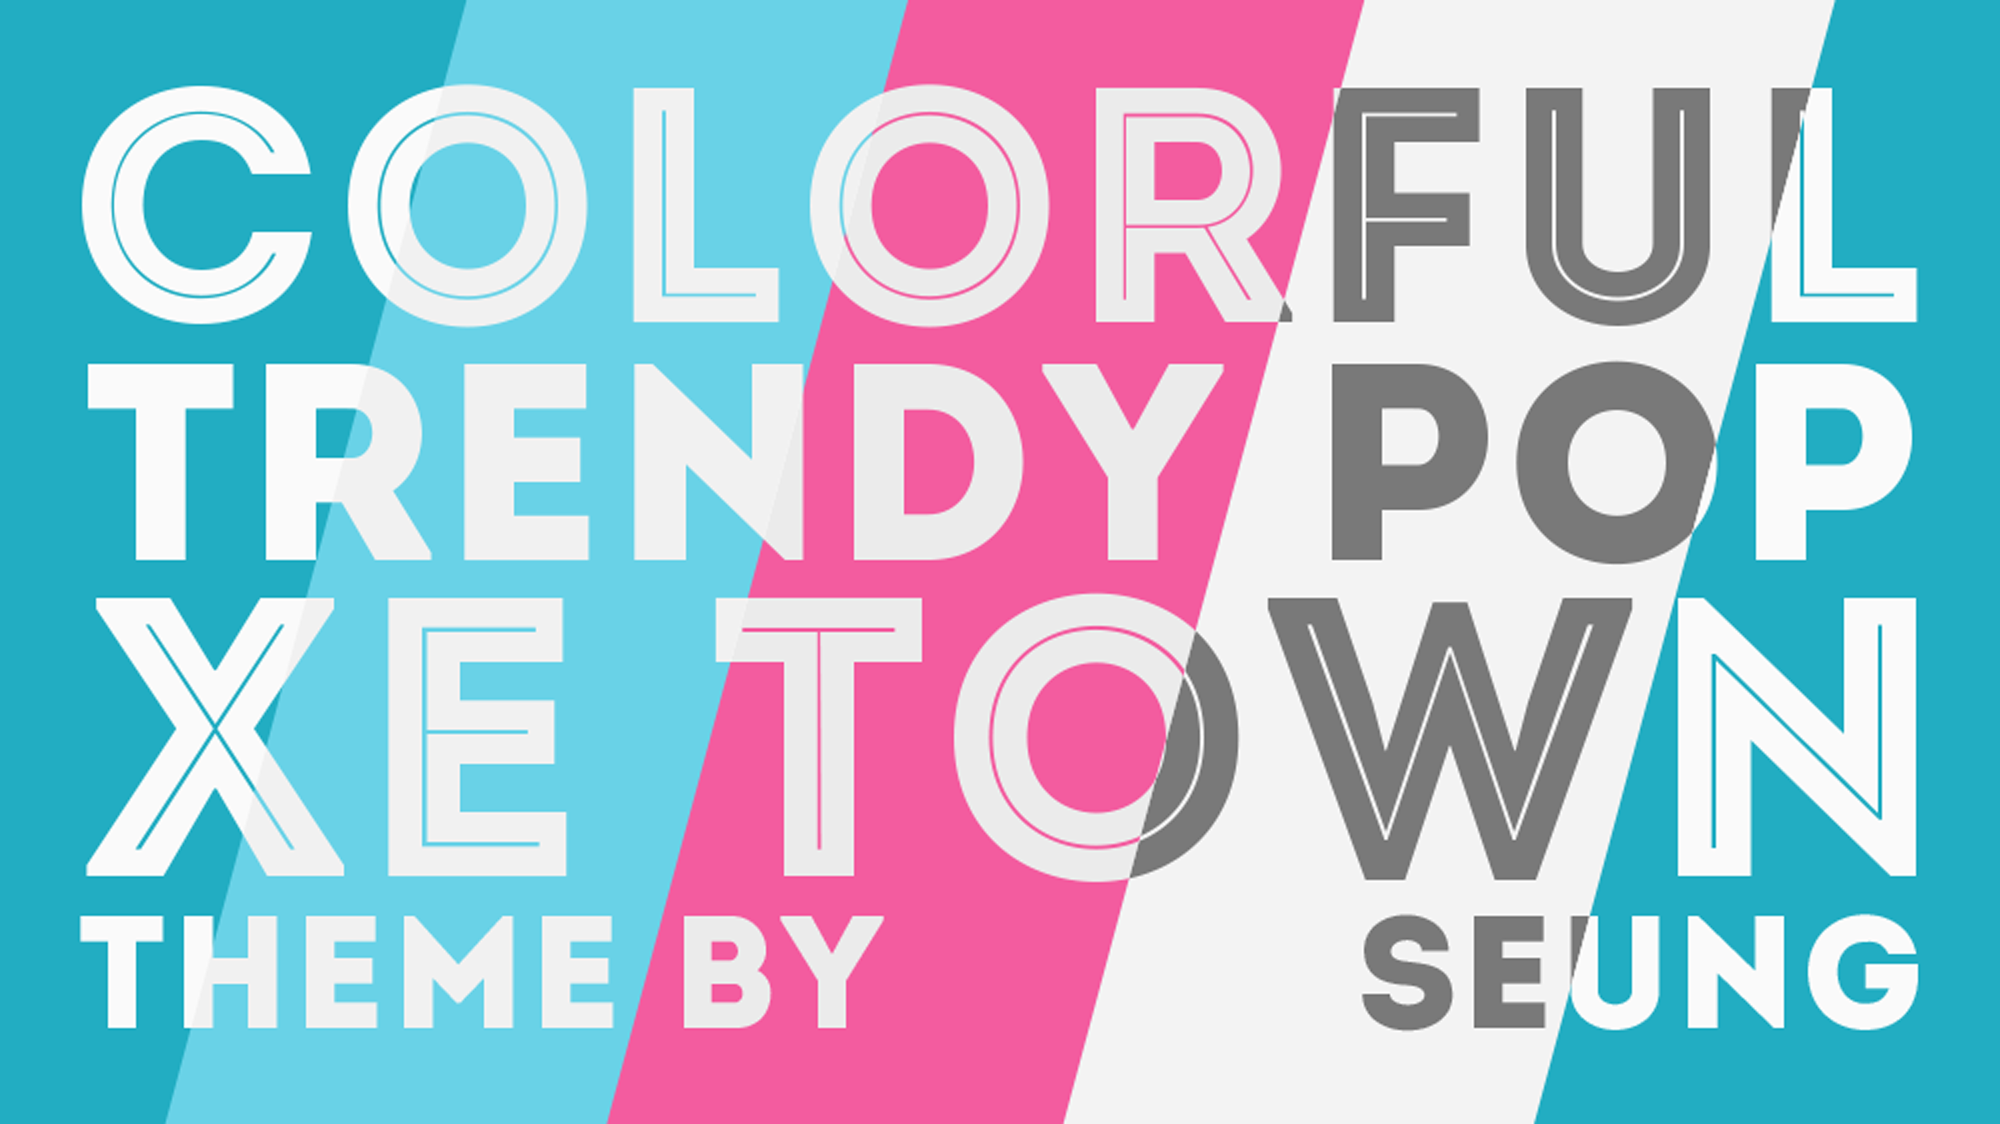 colorful-trendy-pop-xetown-theme.png